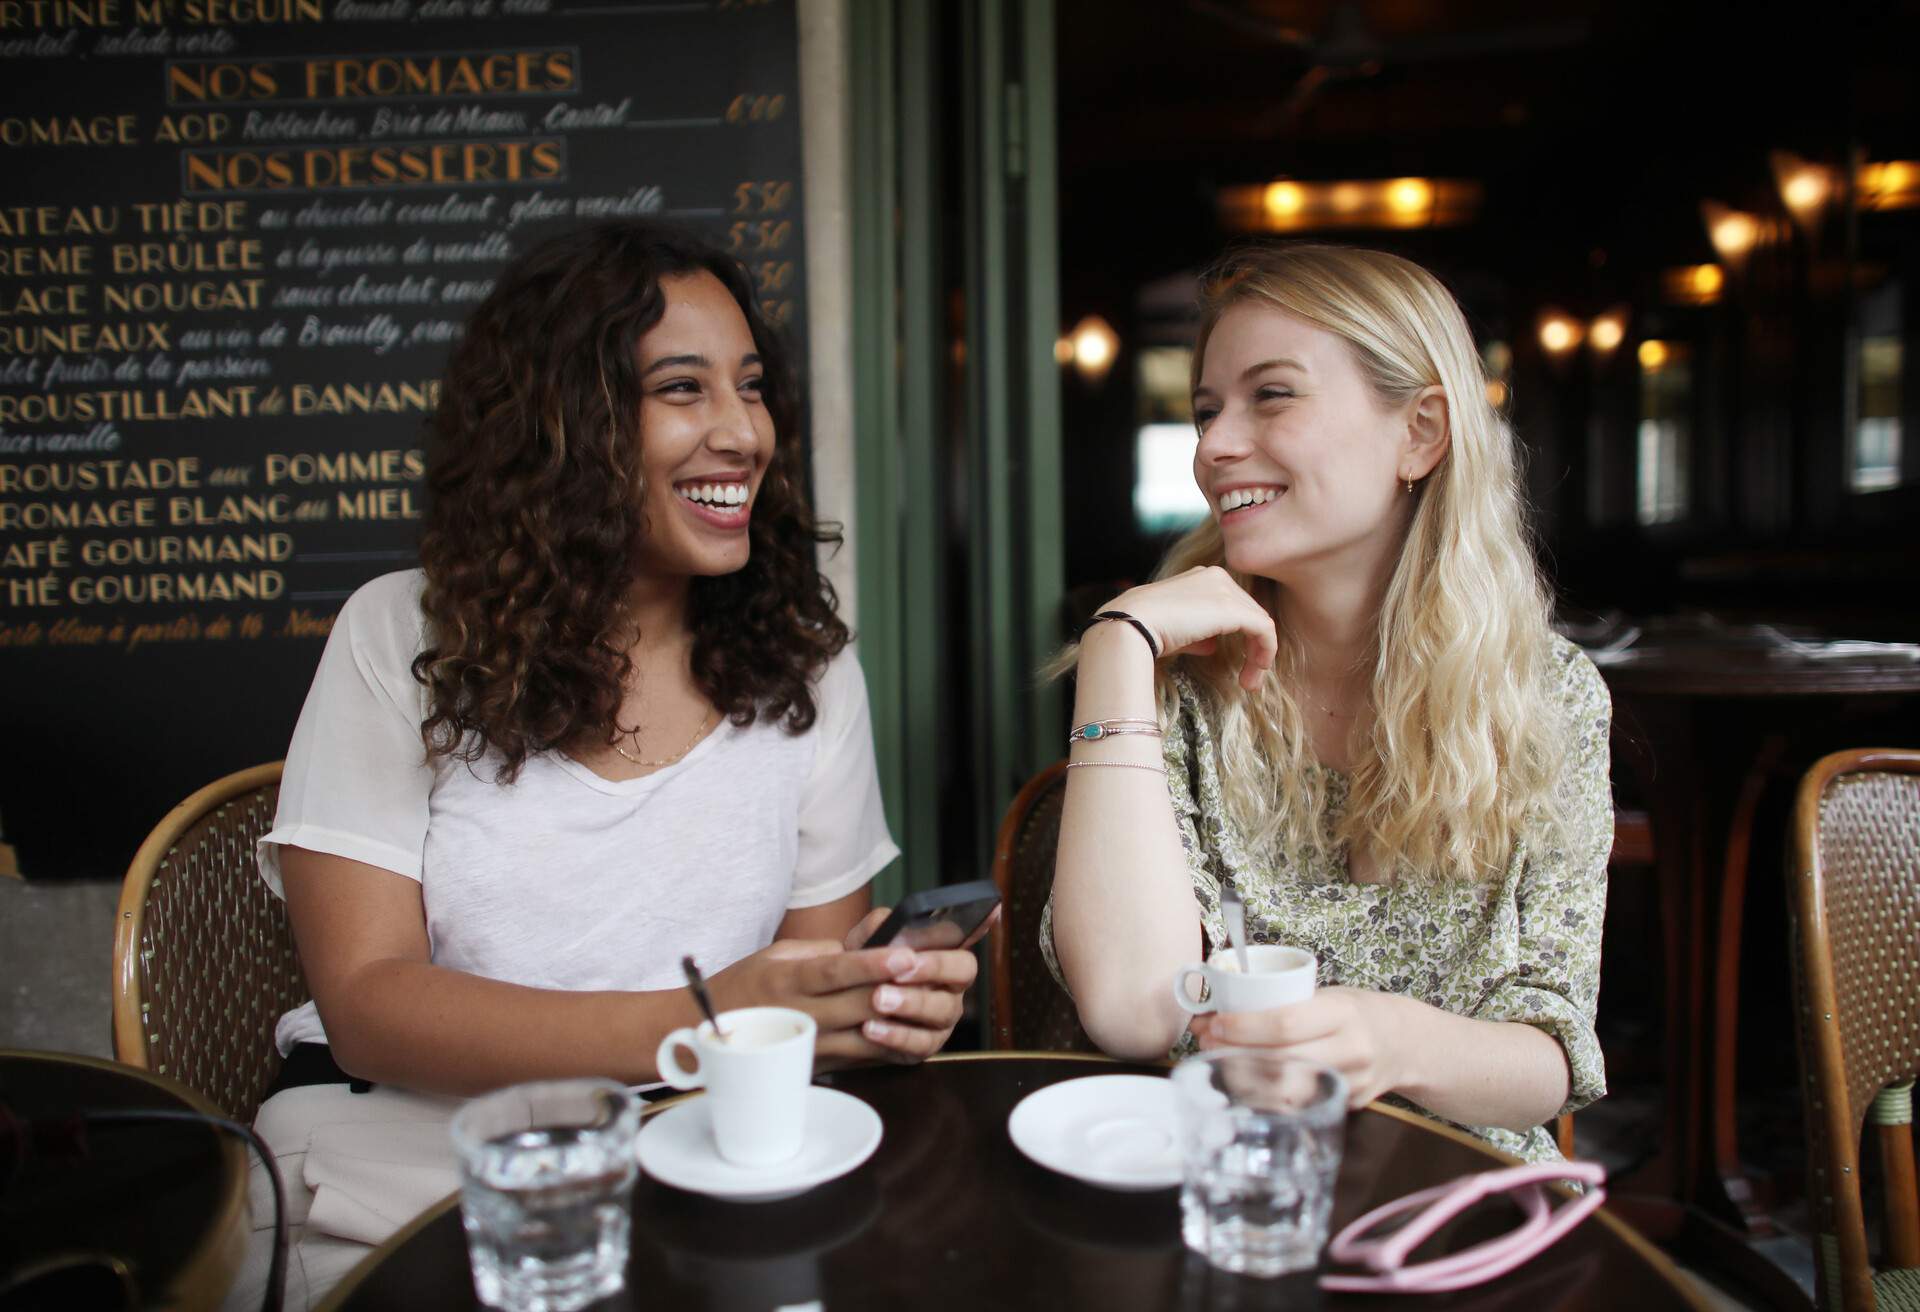 Two female friends smiling at each other as they sit in a café.